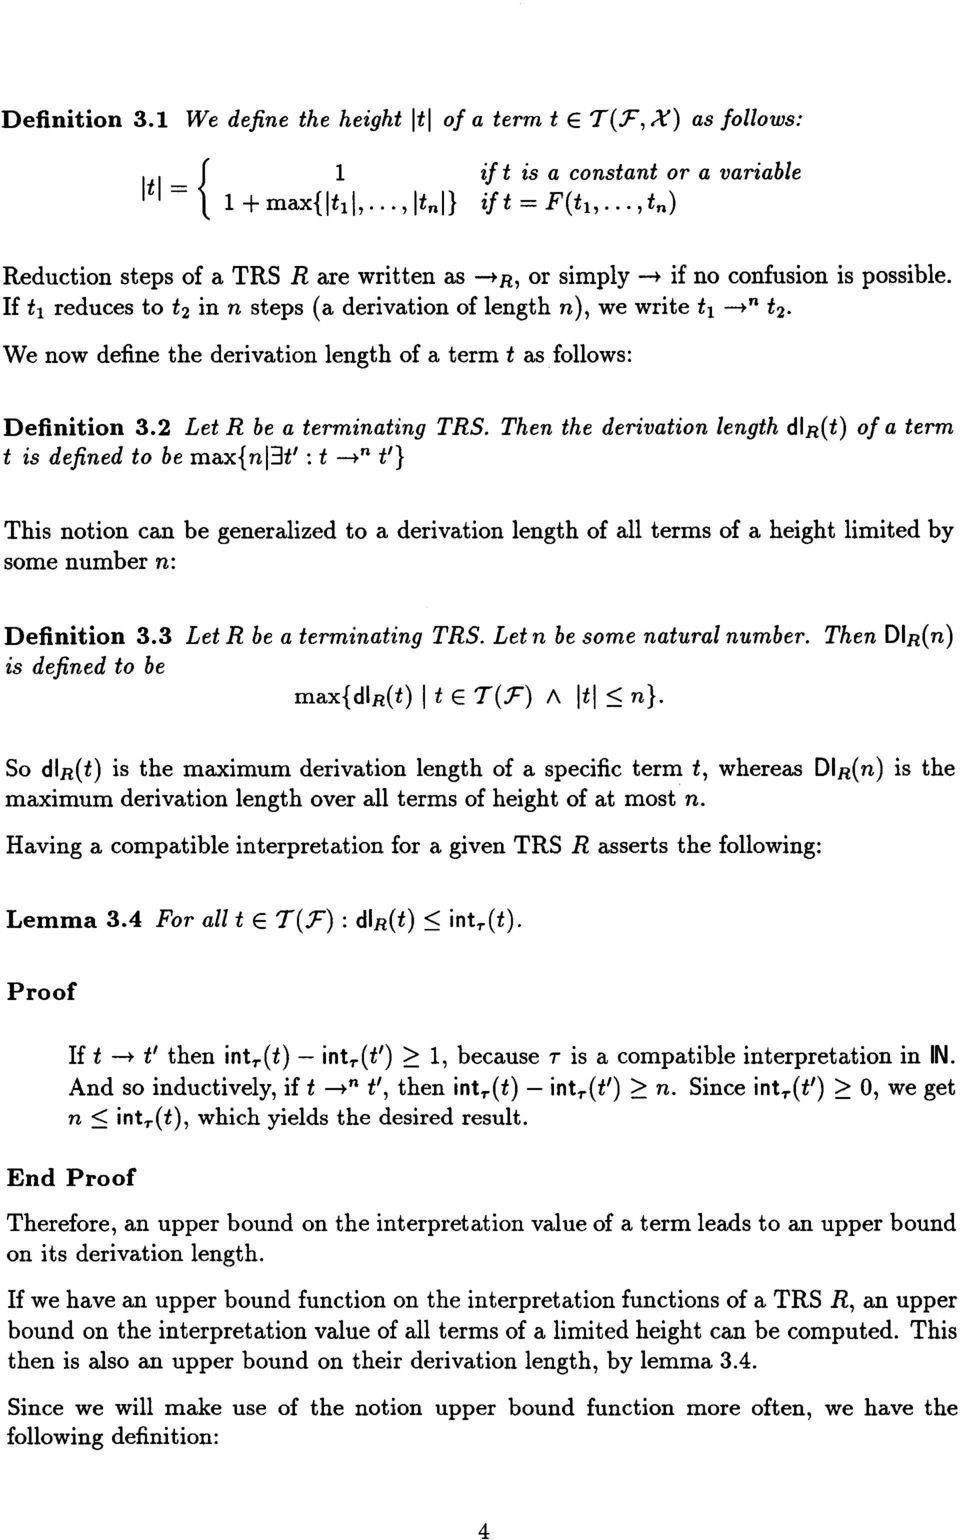 2 Let R be a terminating TRS. Then the derivation length dir(t) of a term t is defined to be maxi nl3t' : t --.